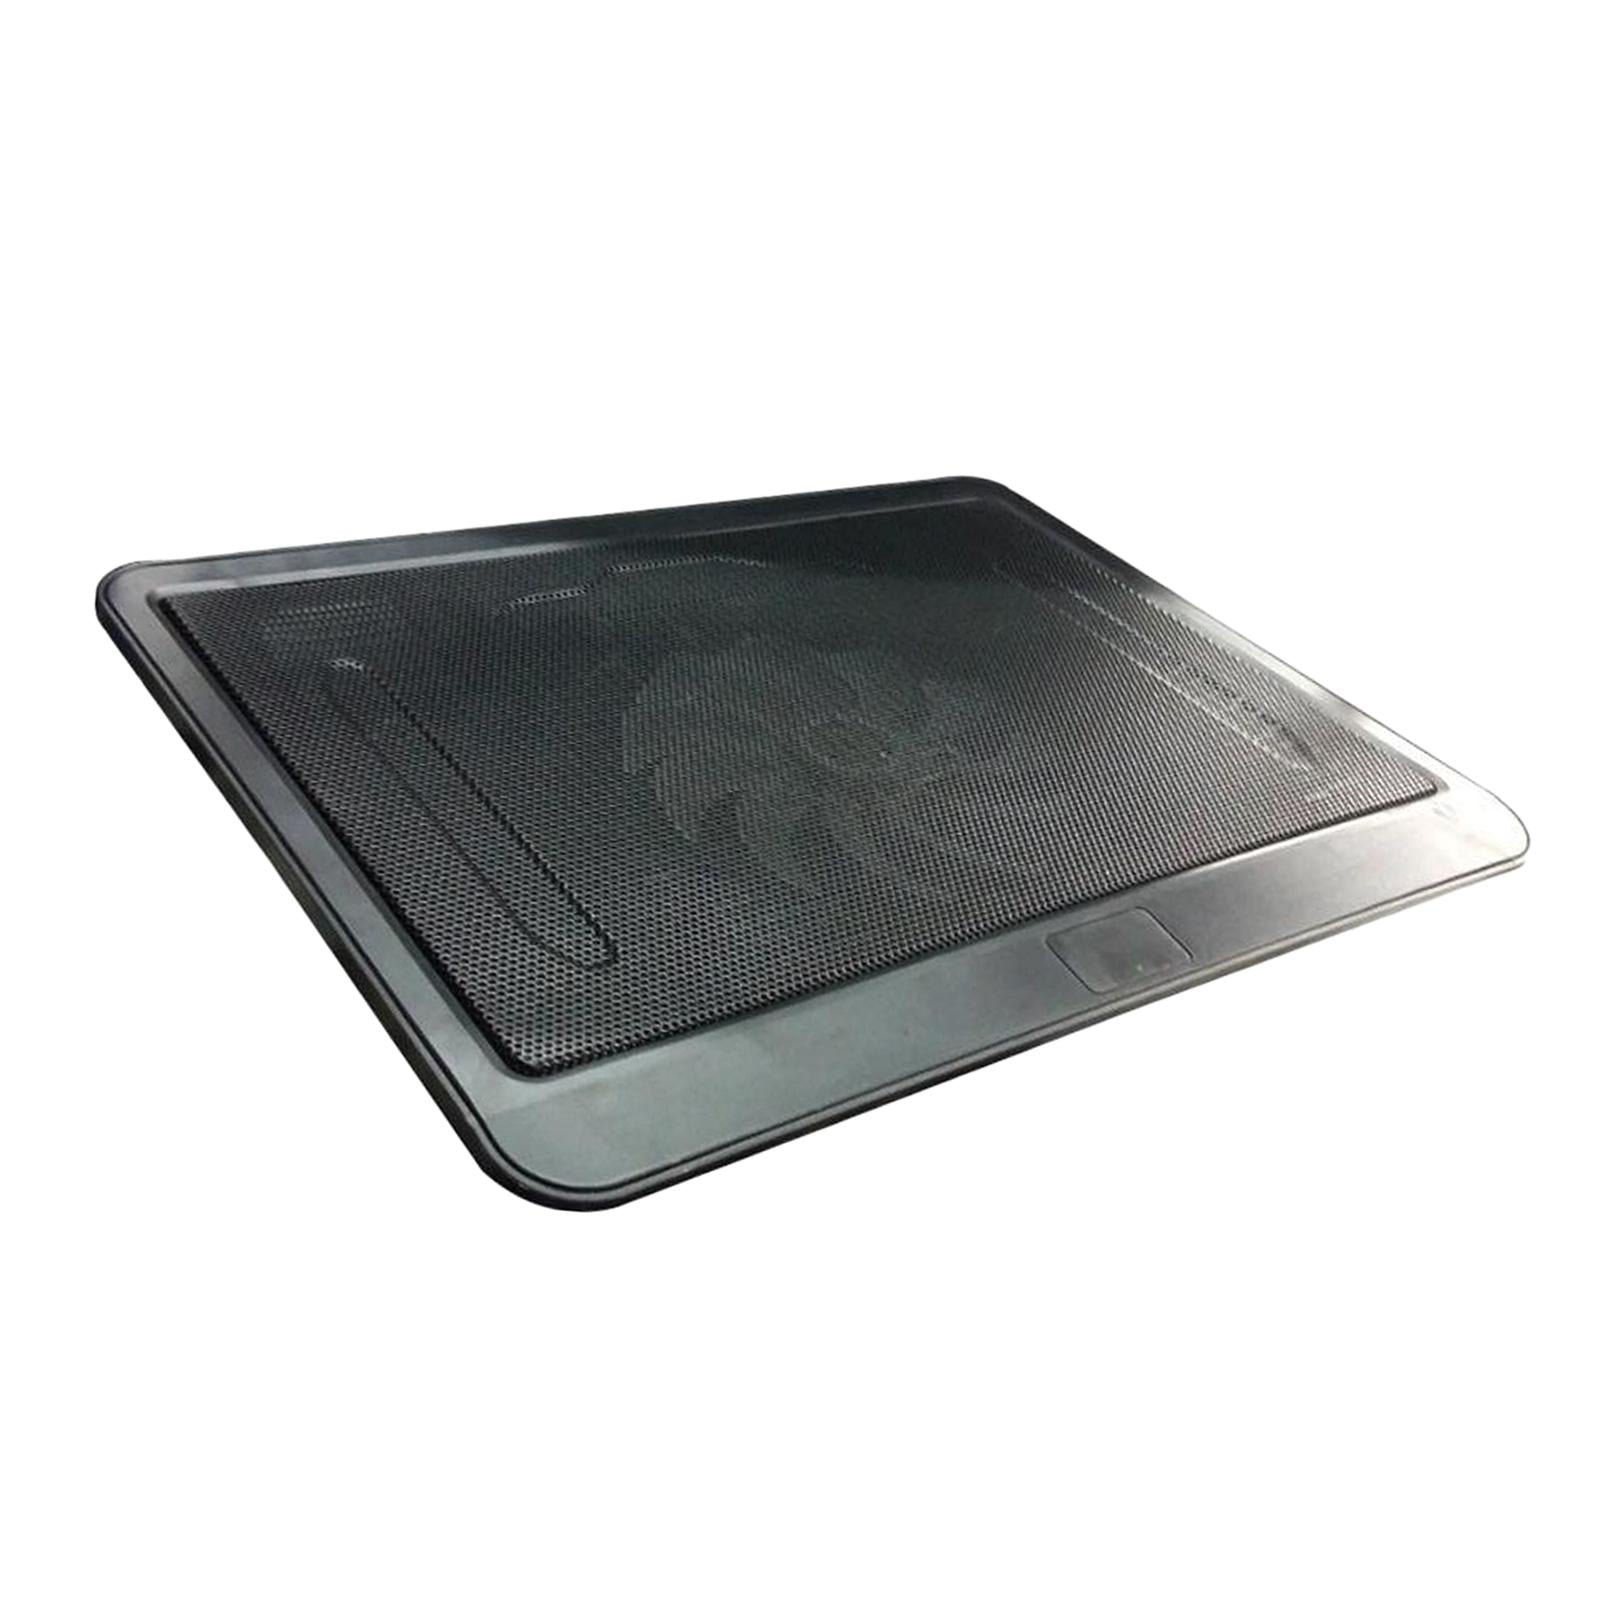 New Portable Notebook Laptop Cooler Mat Quiet Gaming Cooling Pad Tray Black